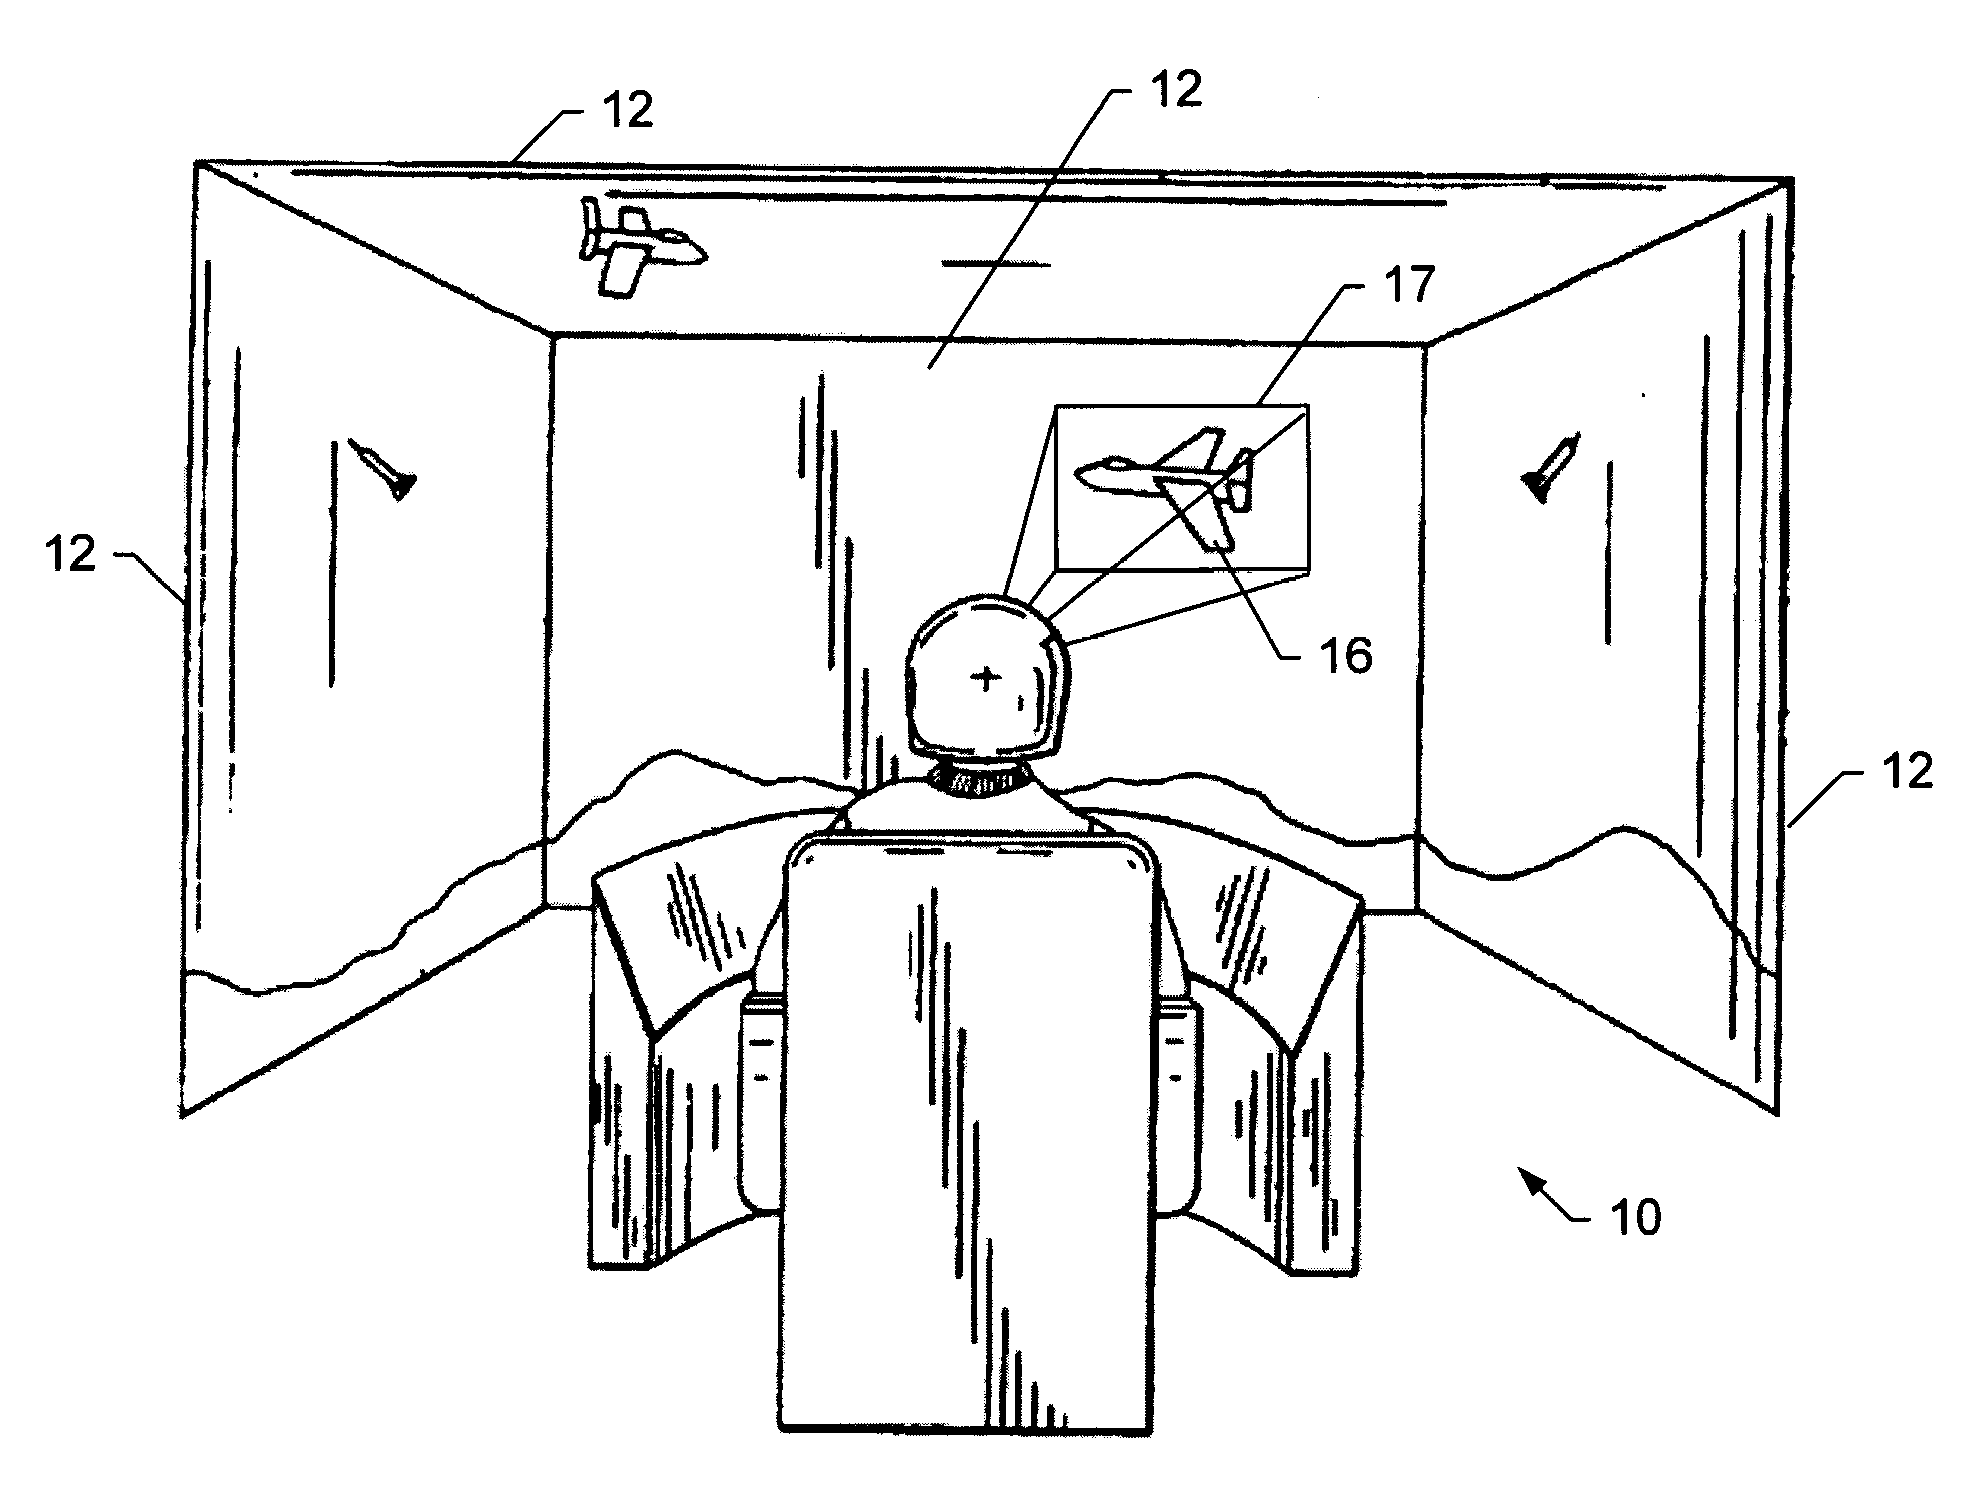 Gaze tracking system, eye-tracking assembly and an associated method of calibration